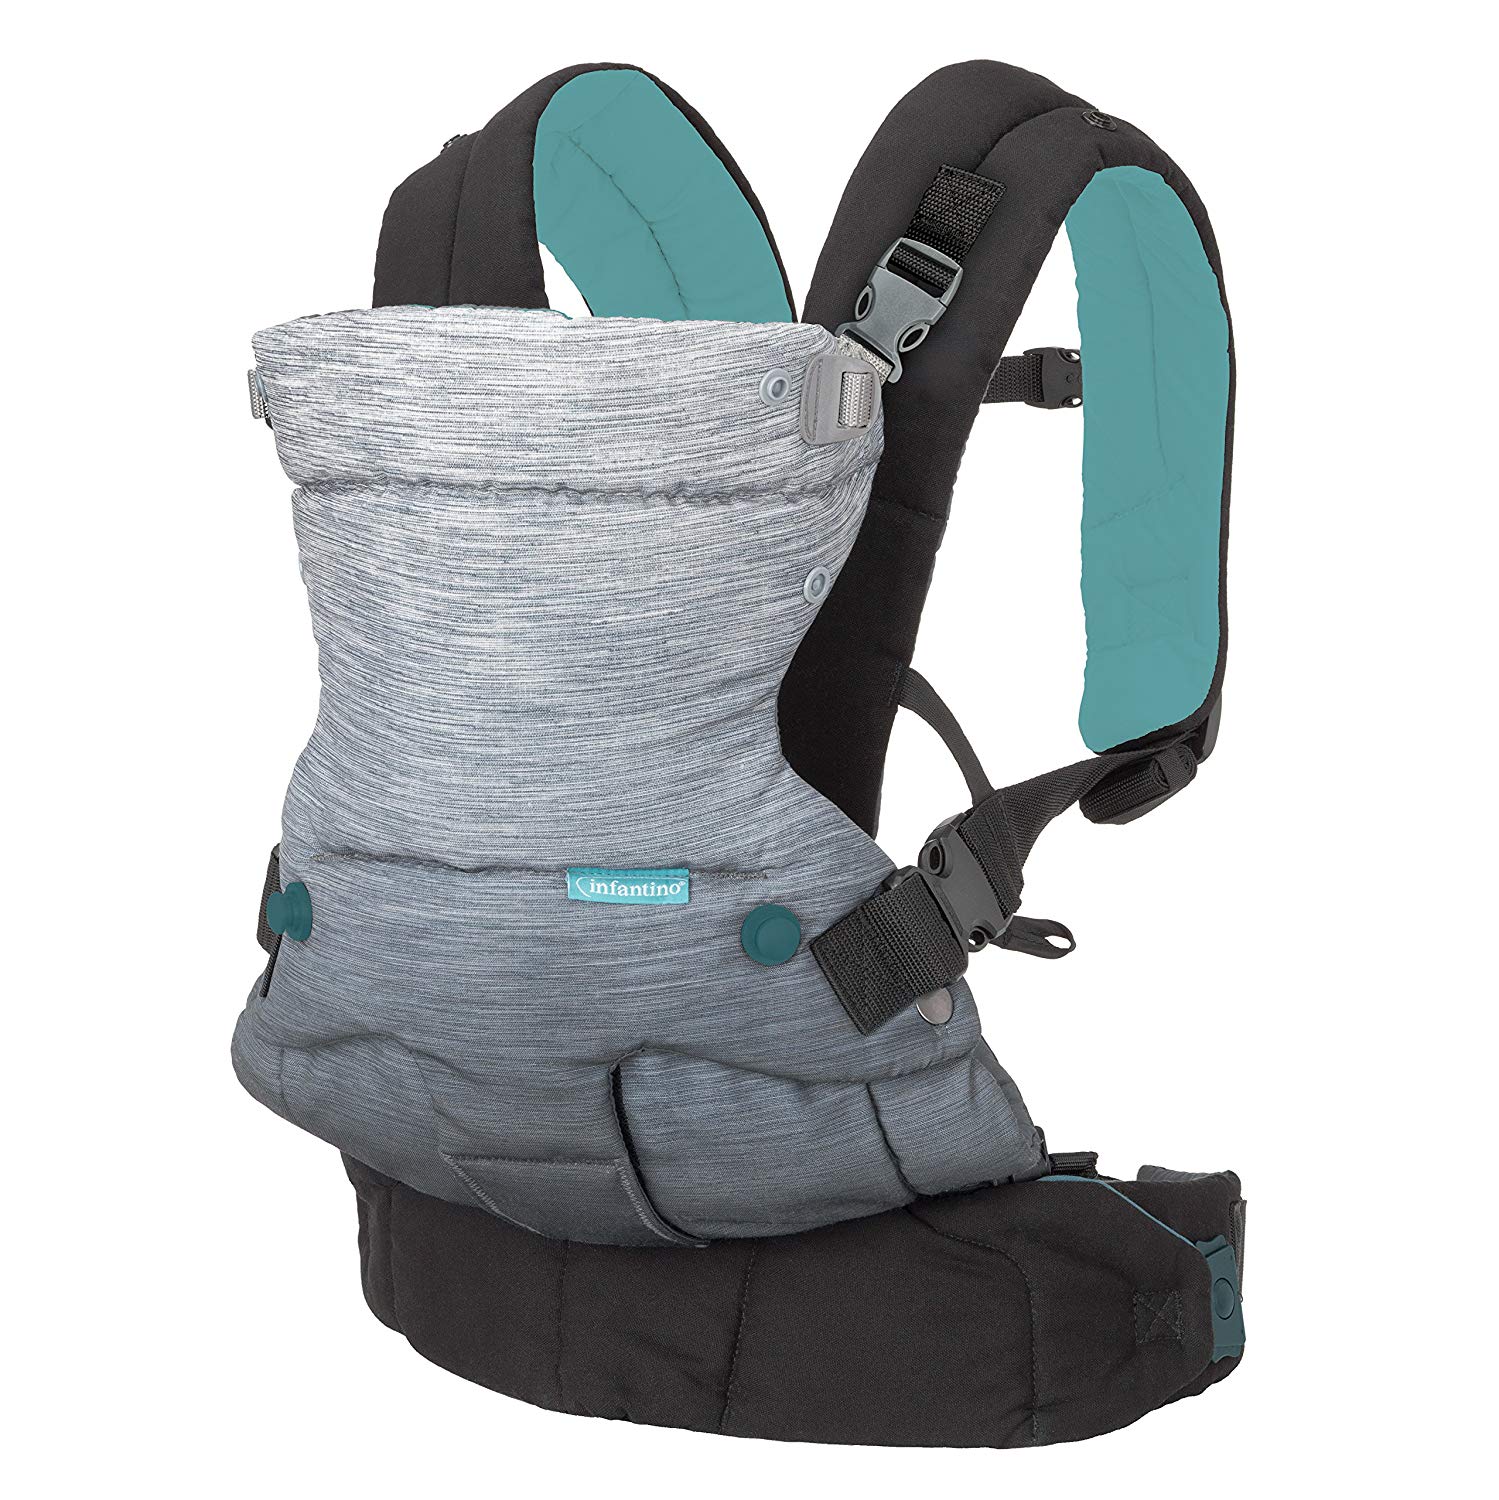 Infantino Cuddle Up Ergnomic Baby Carrier with Hood, Baby Carrier, Grey